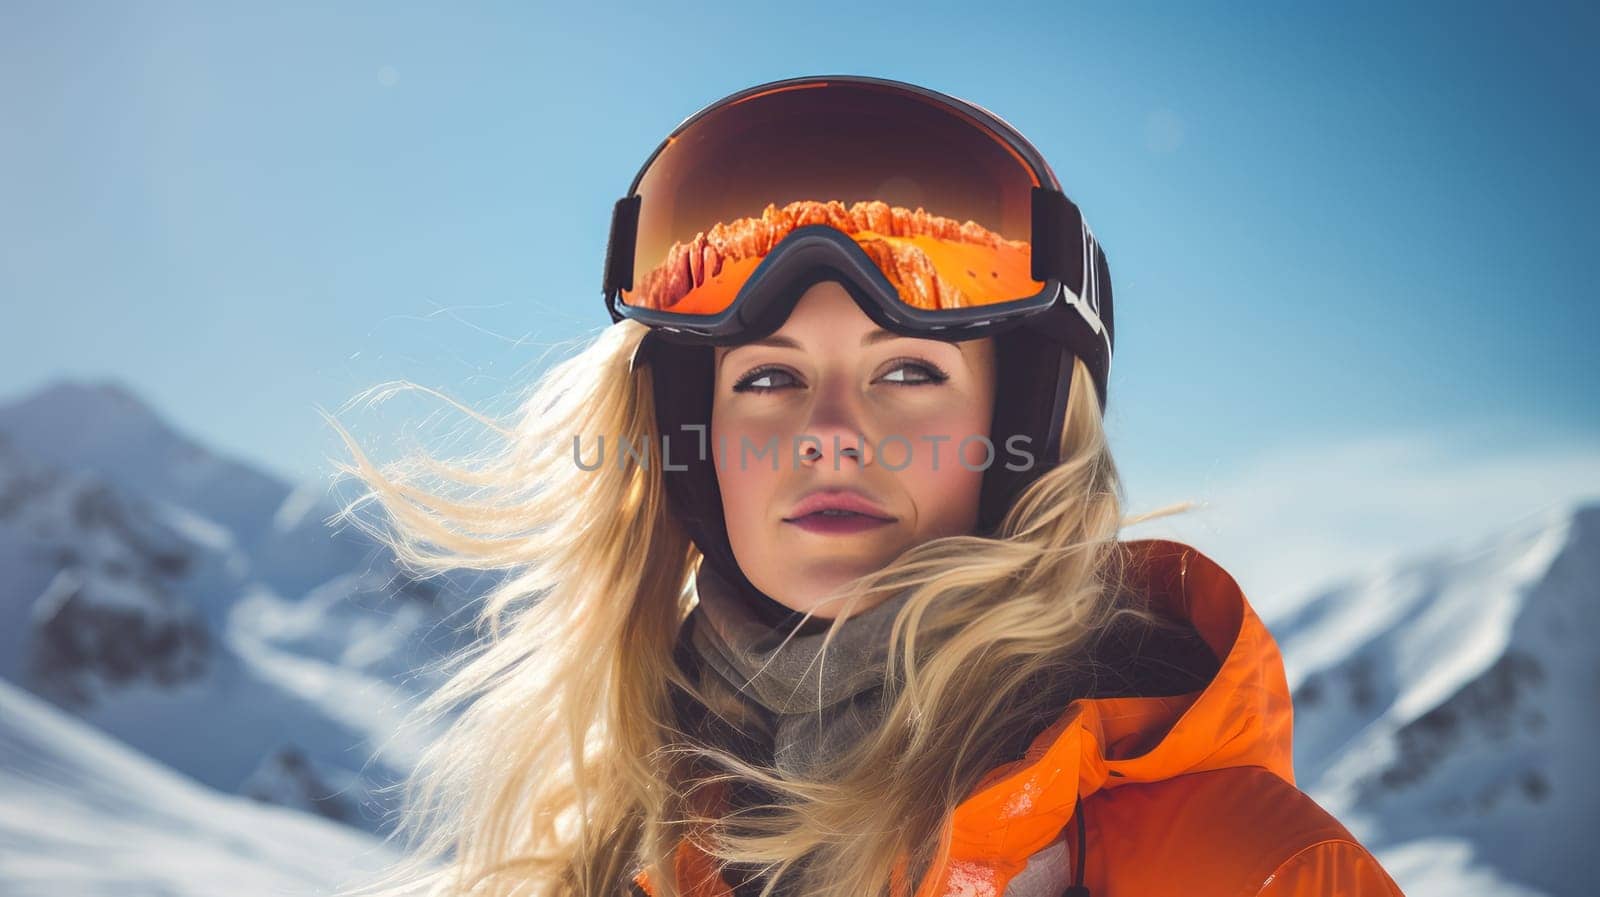 Portrait of a happy, woman snowboarder against the backdrop of snow-capped mountains at a ski resort, during winter holidays. Concept of traveling around the world, recreation winter sports vacations tourism in the mountains and unusual places